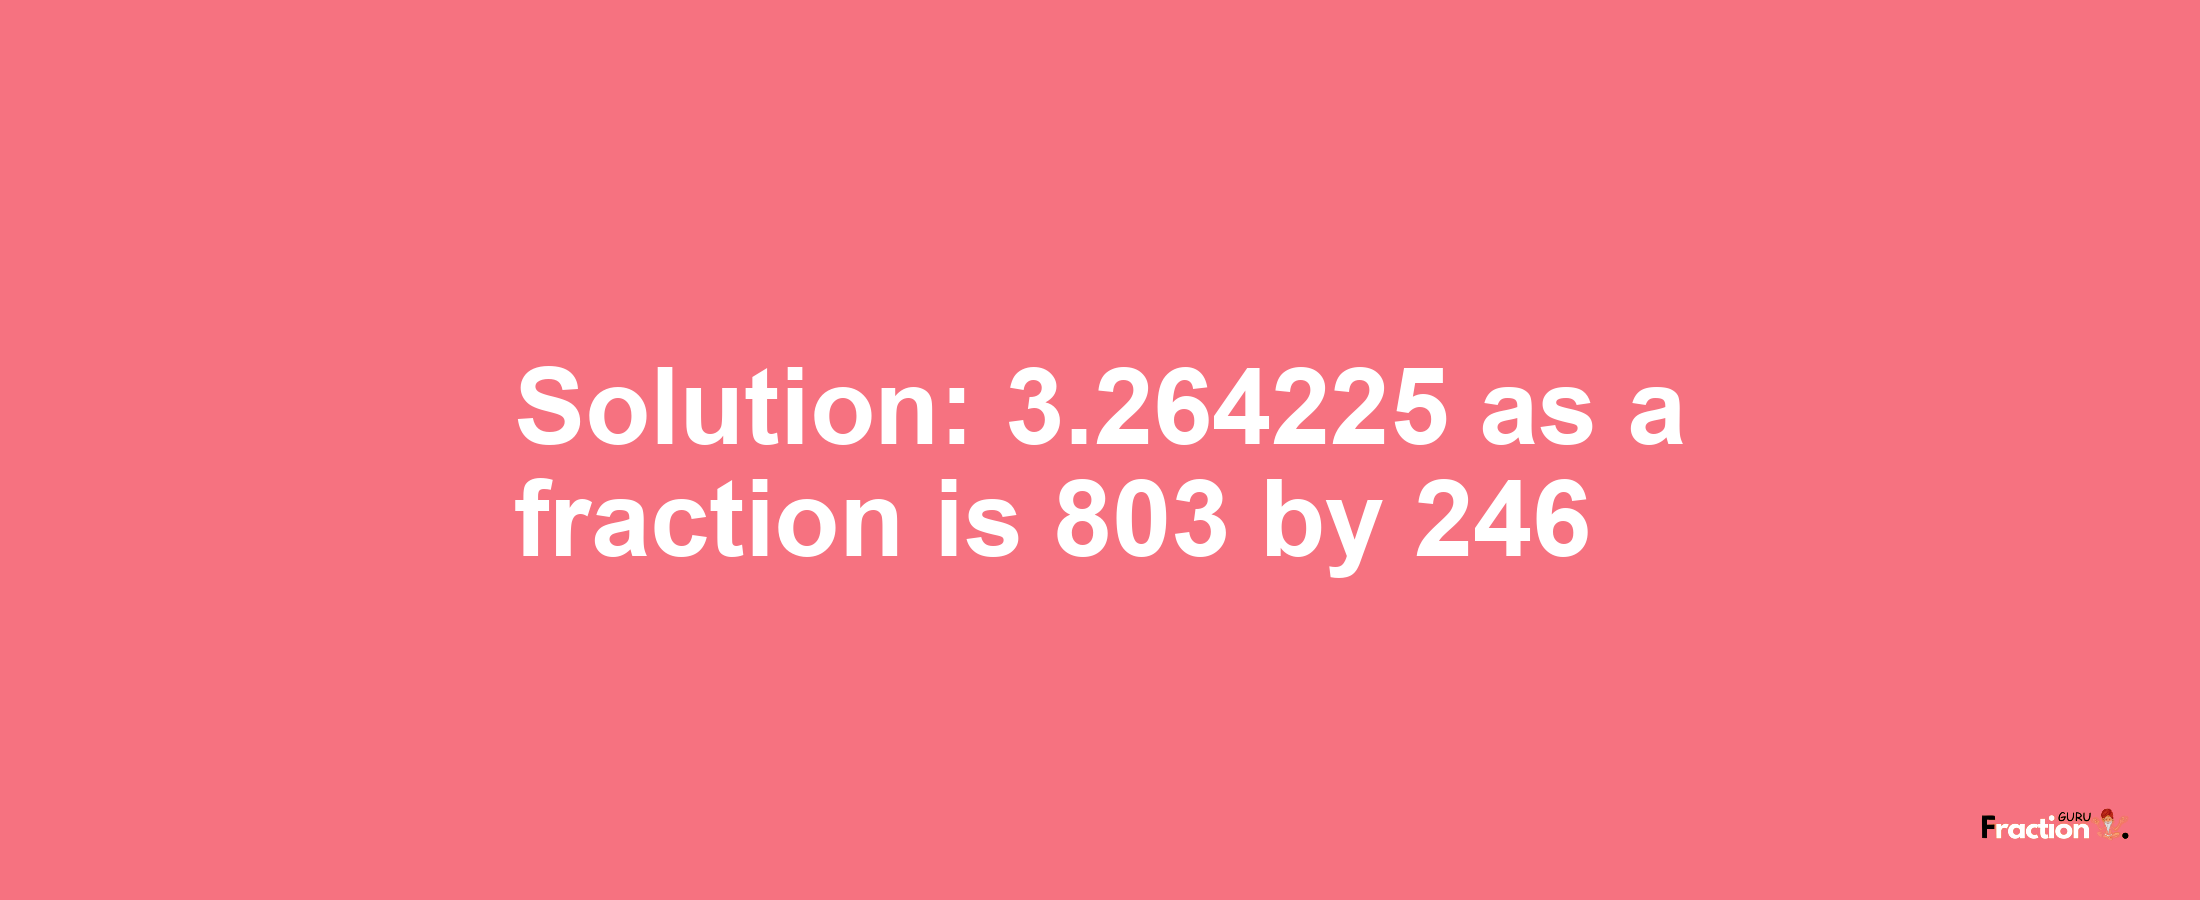 Solution:3.264225 as a fraction is 803/246